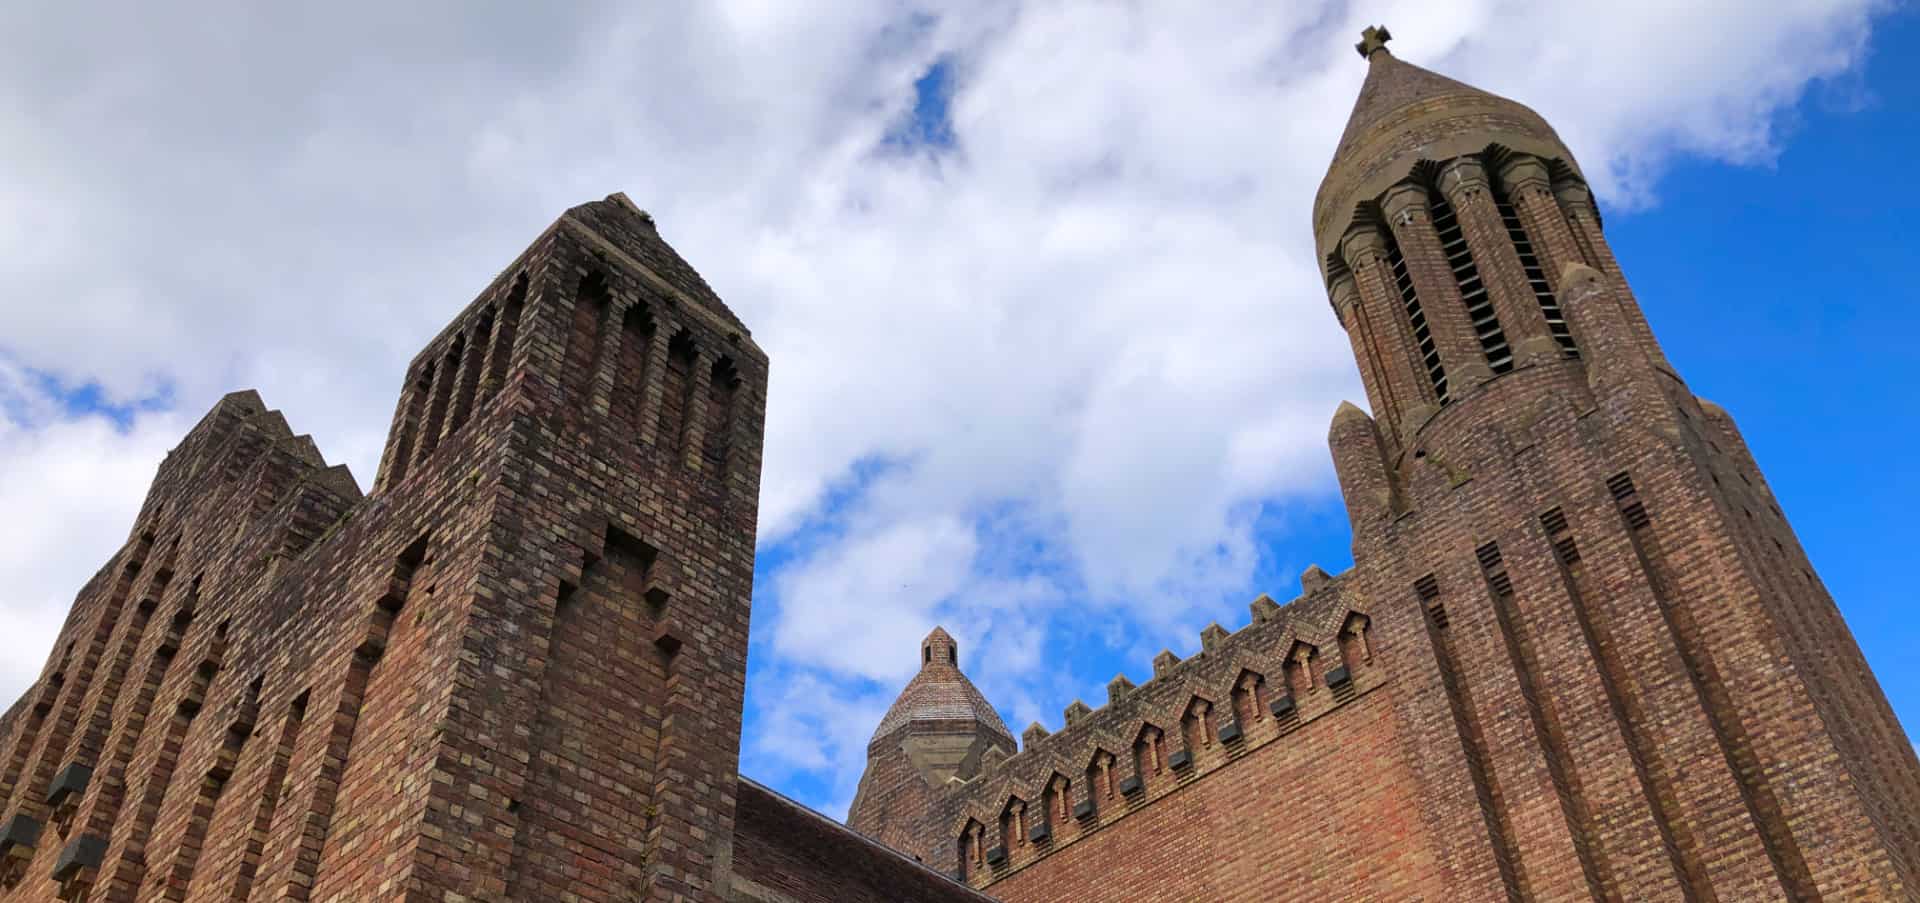 The top of quarr abbey with blue sky behind